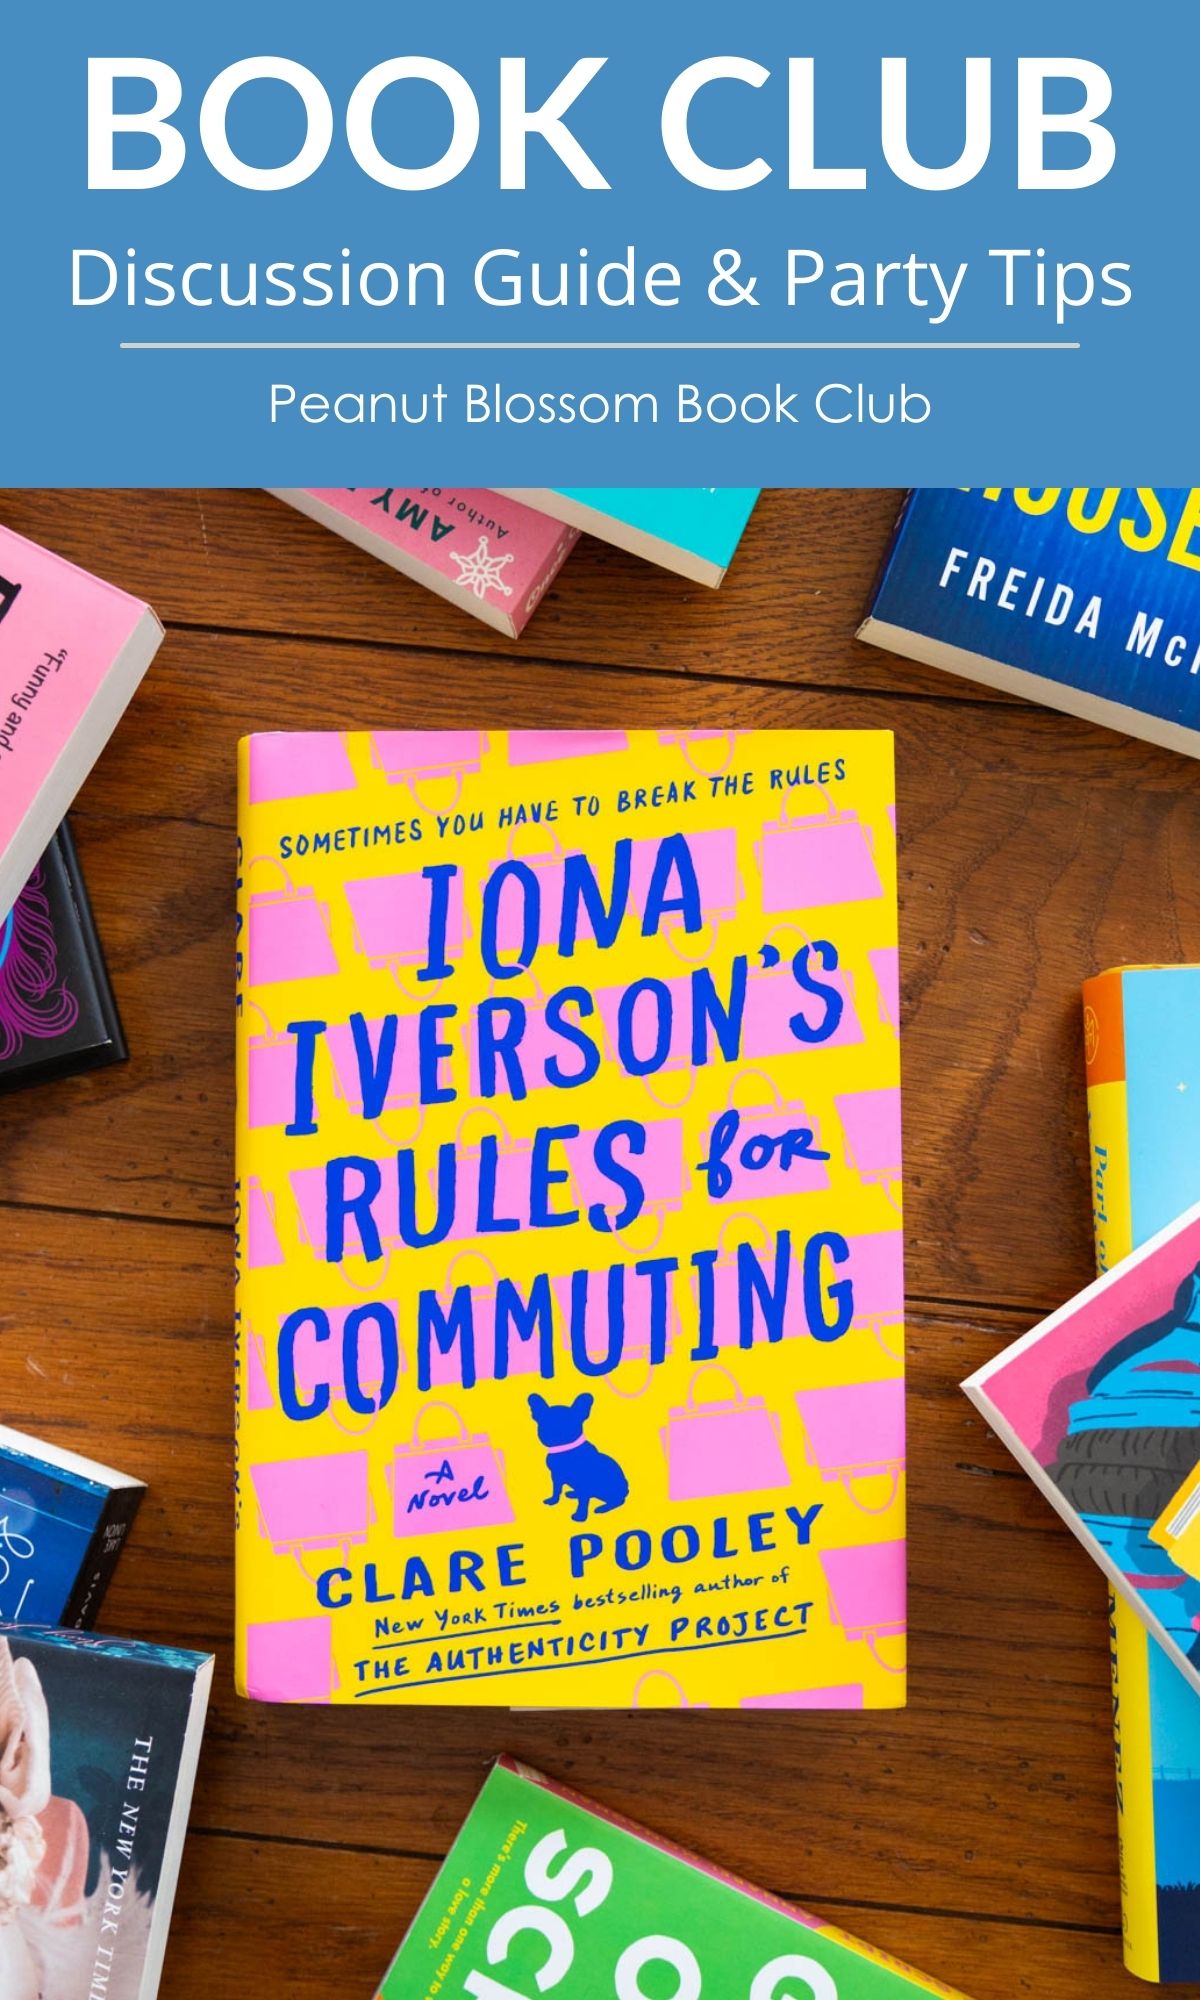 A copy of the book Iona Iverson's Rules of Commuting is on the table.